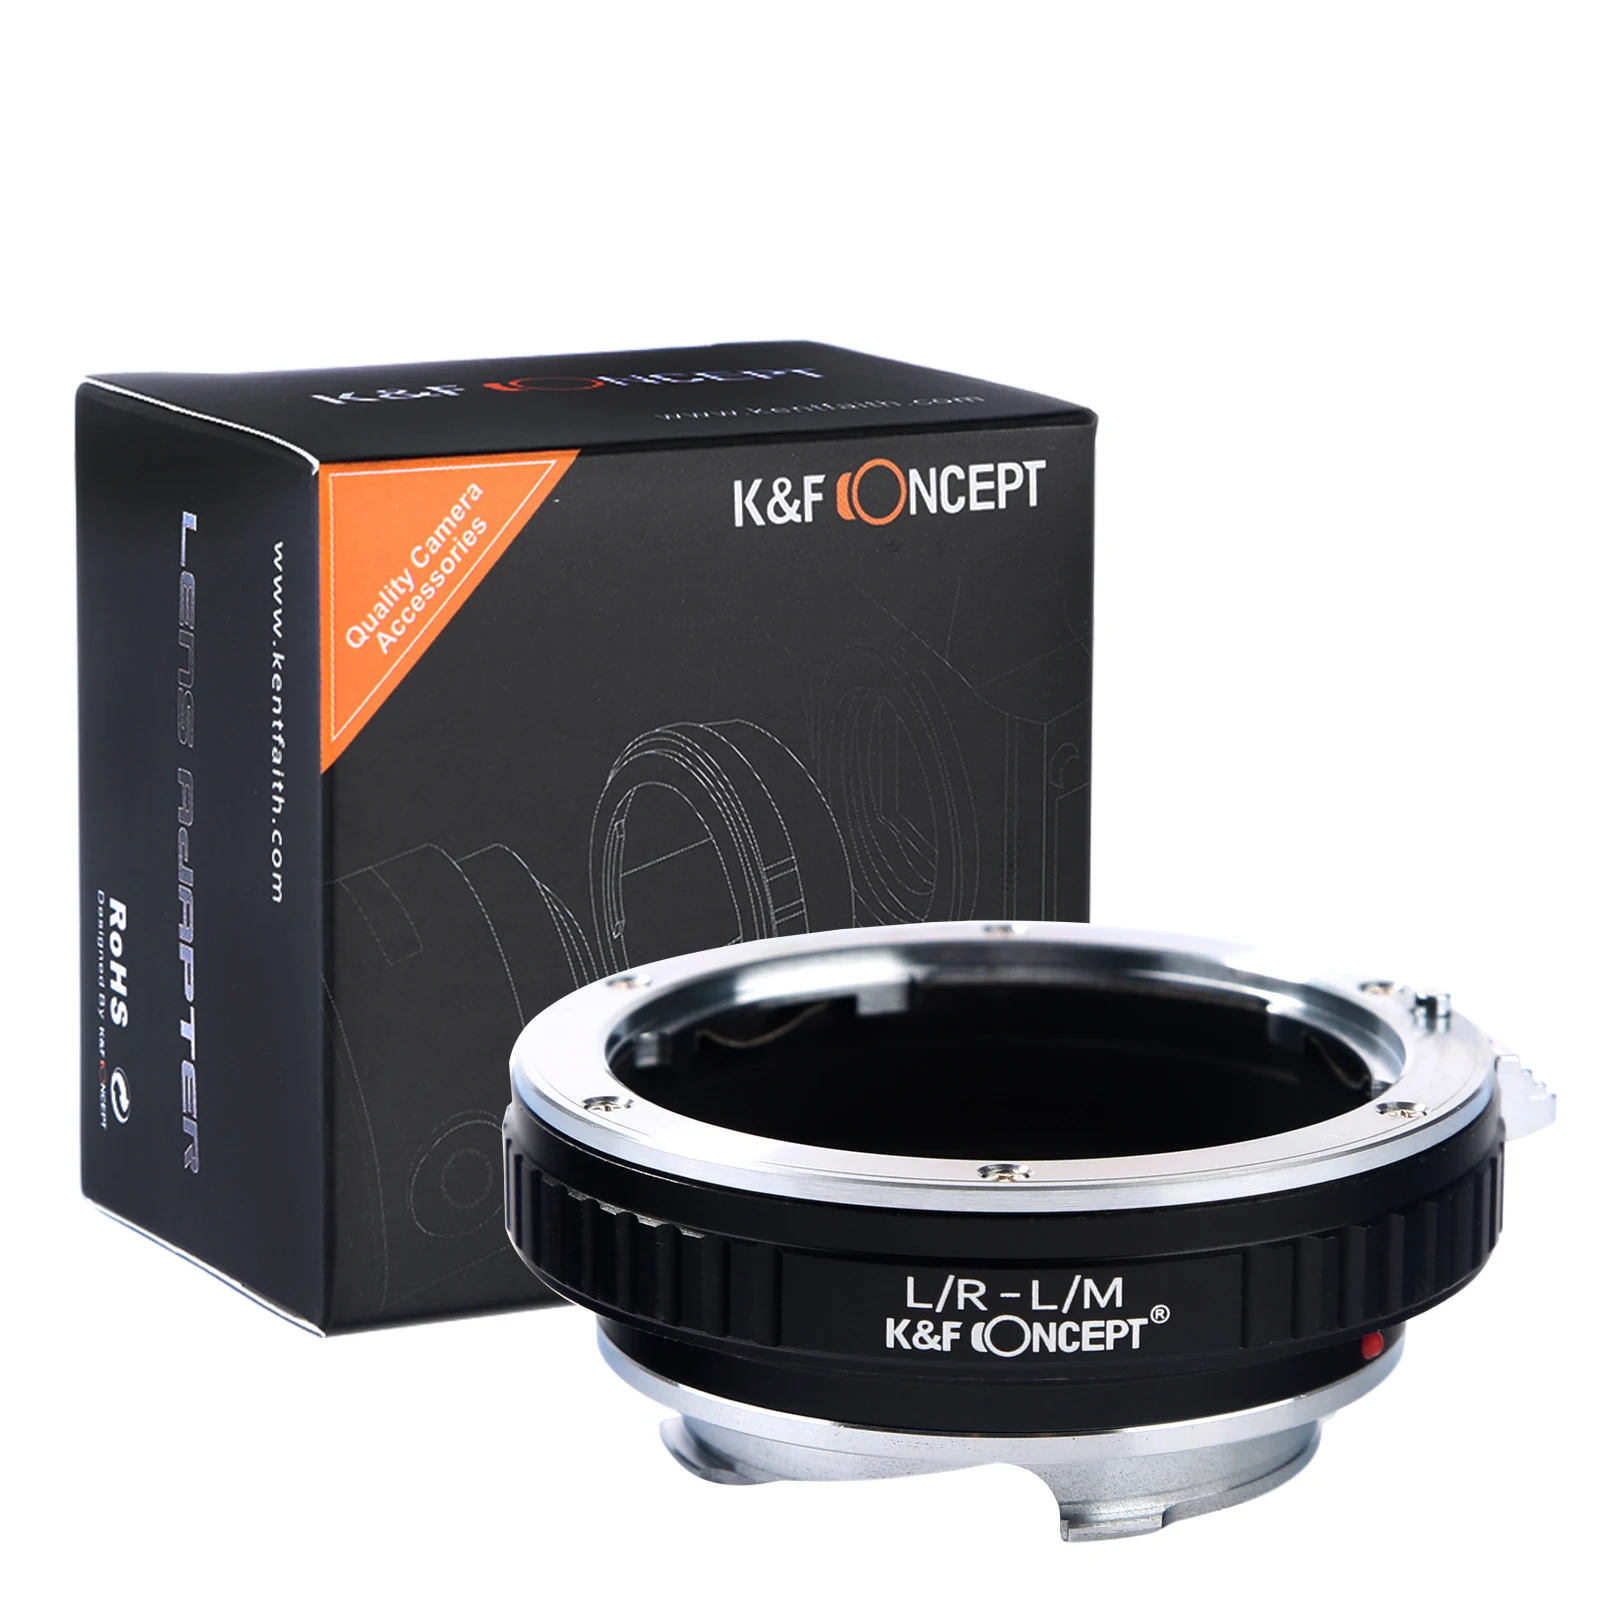 

K&F Concept LR to LM Lens Adapter For Leica R LR Mount Lens to Leica M1 M3 M6 M9 M10 M240 M-P